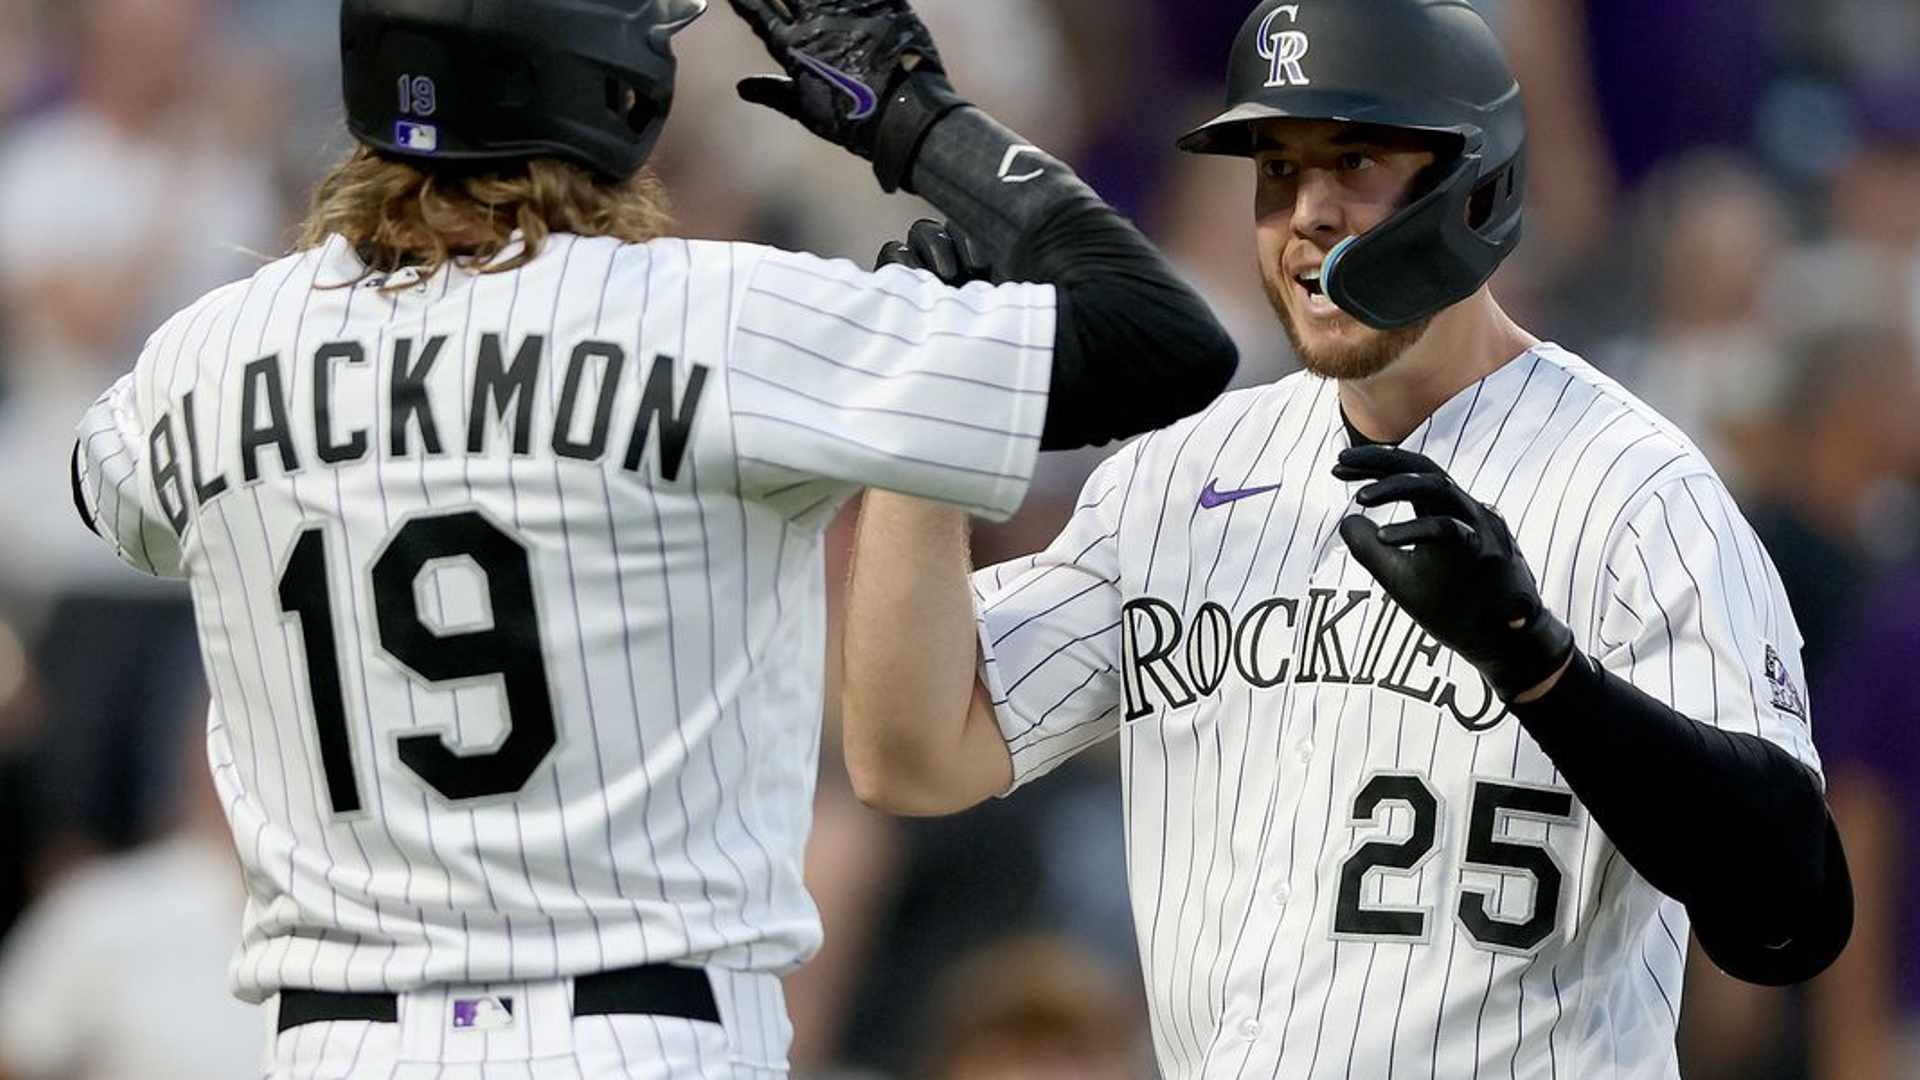 Rockies vs Padres MLB Live Stream, Schedule, Lineups, 13 July 2022